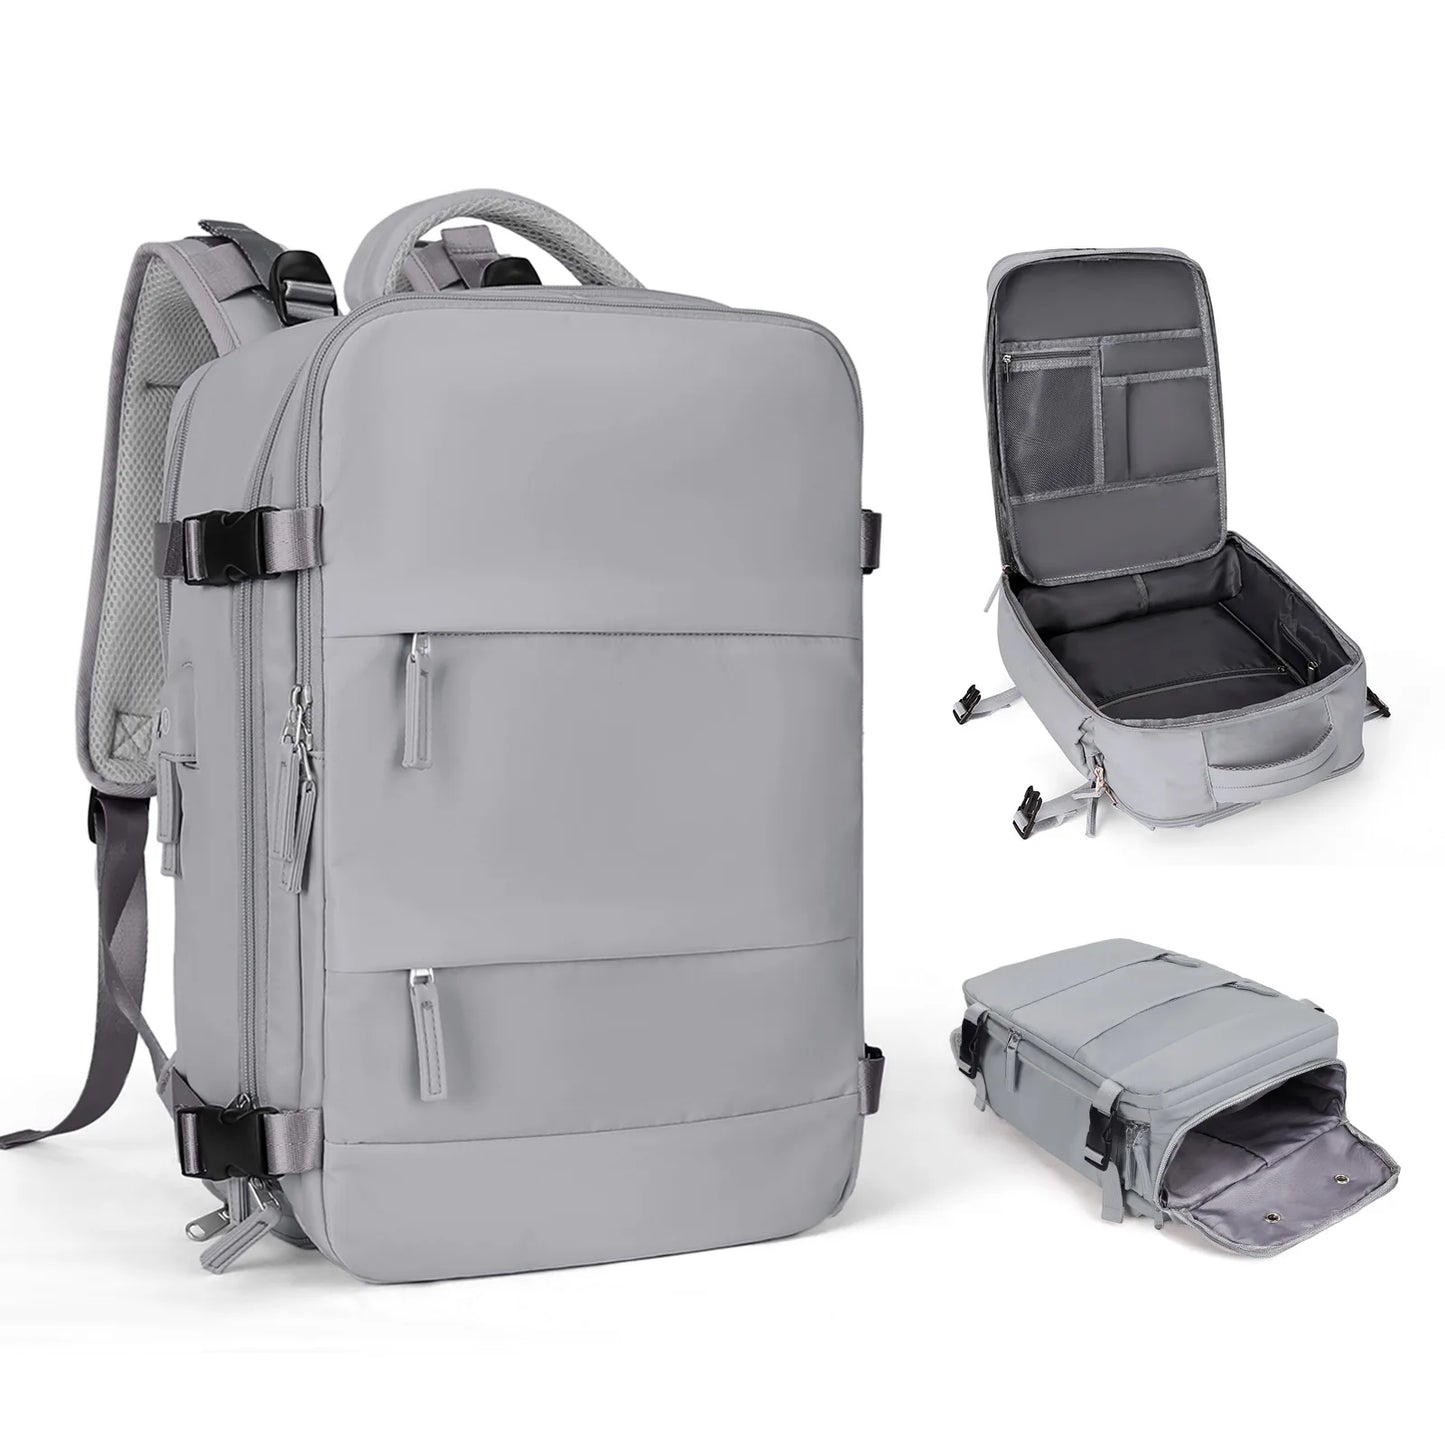 gray travel backpack personal item with wet dry pocket laptop sleeve usb charger and shoe sleeve